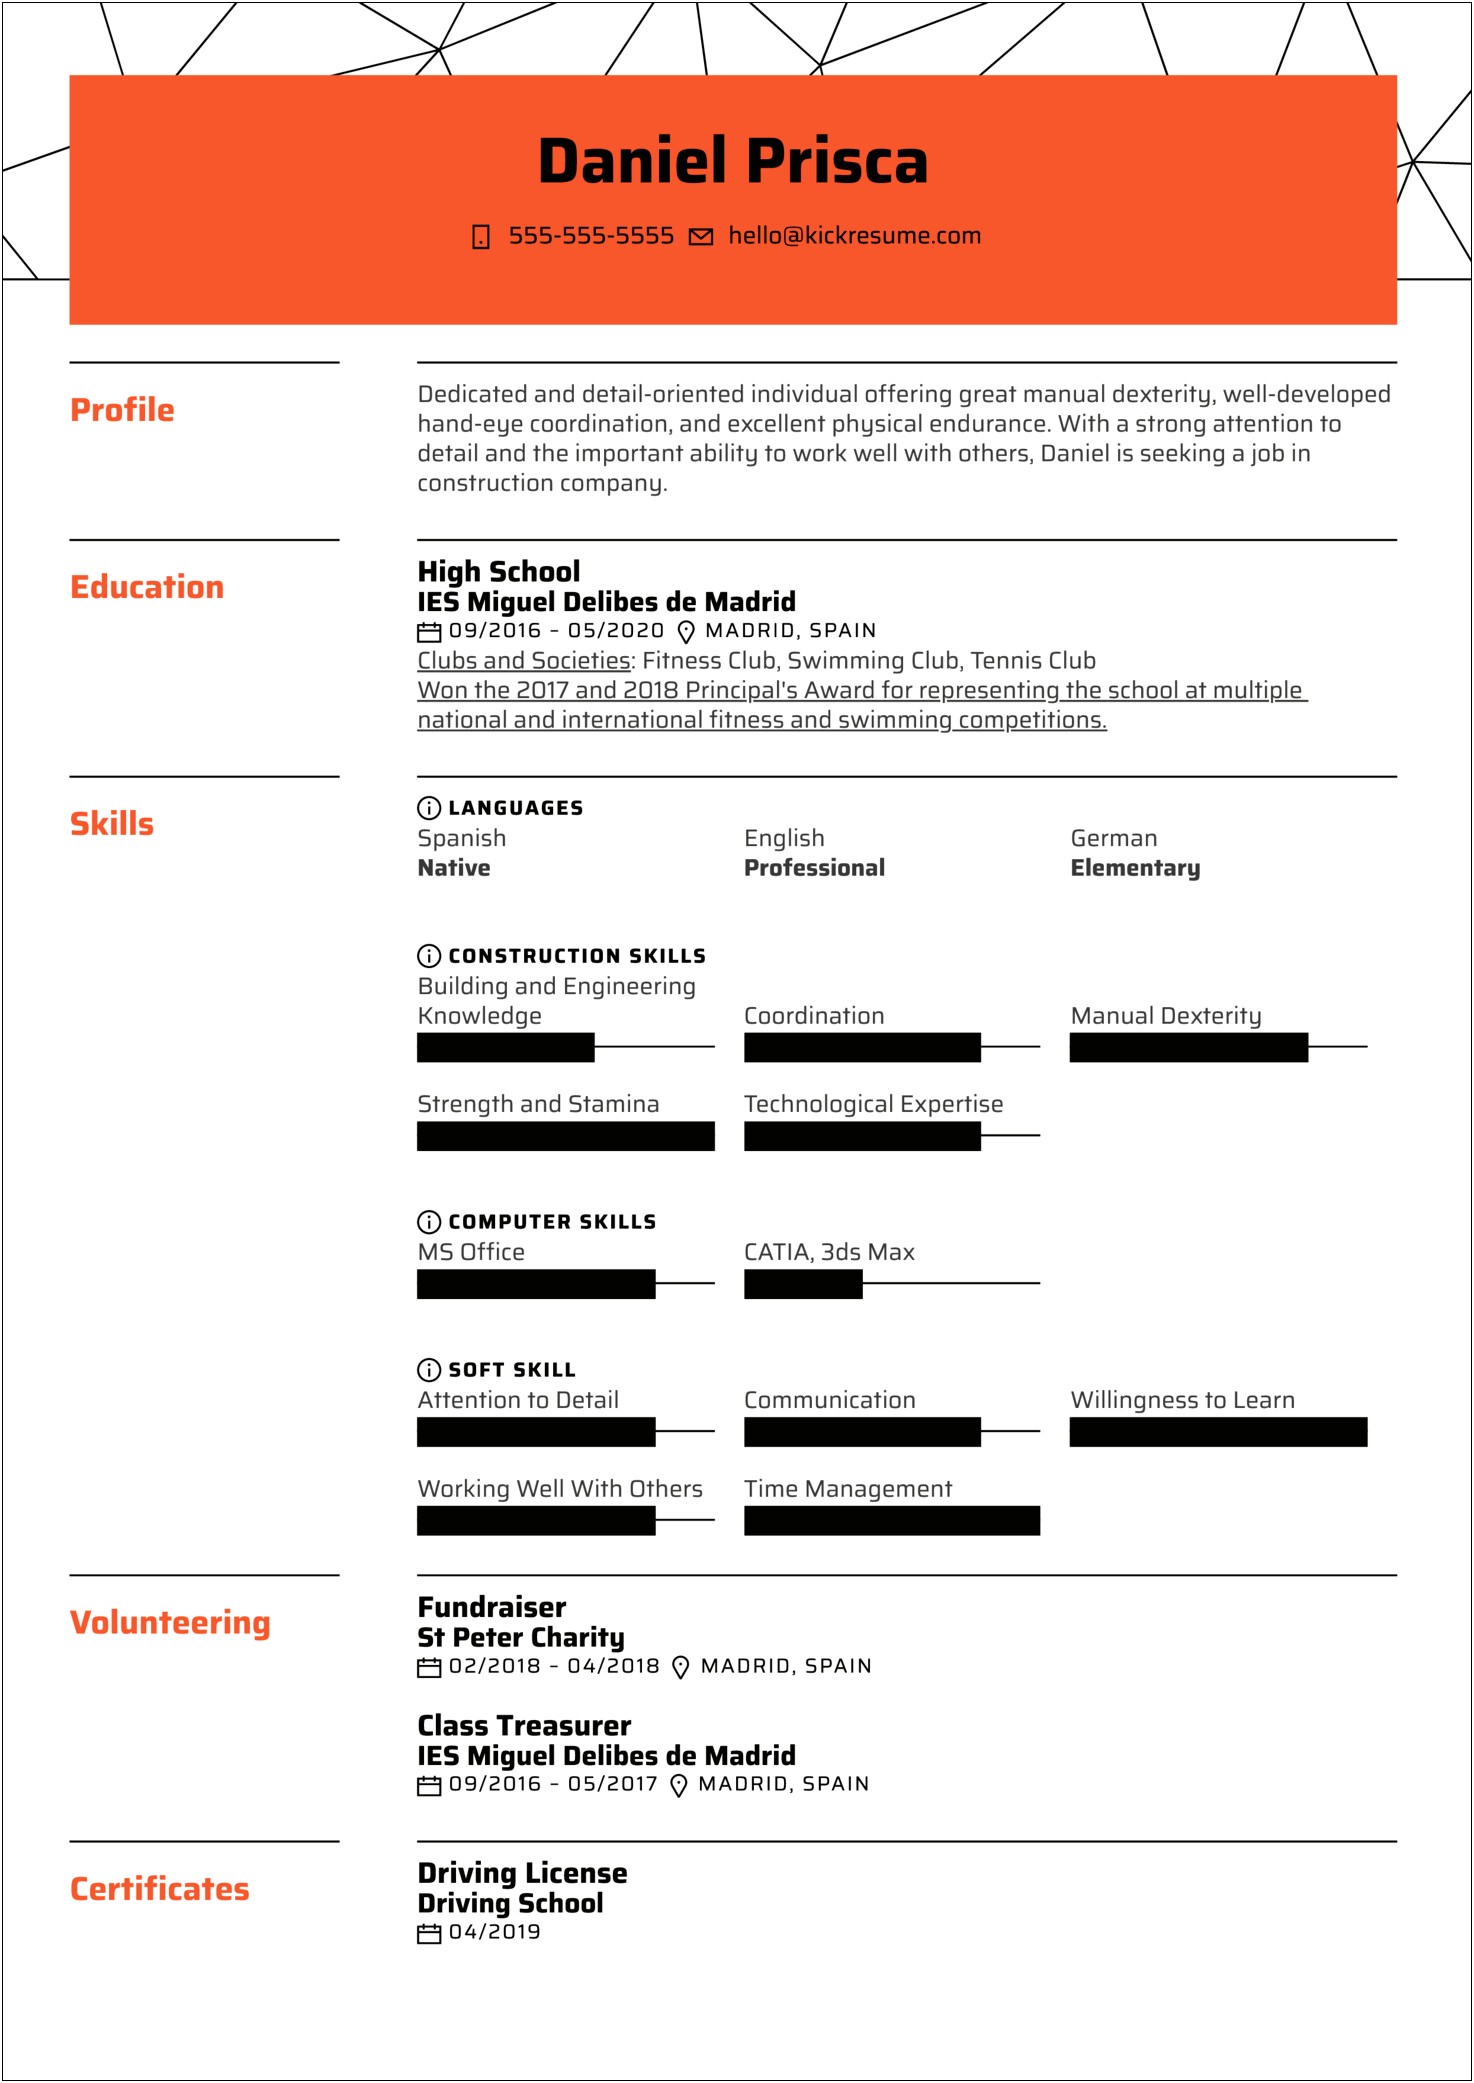 Related Experience And Other Experience On Resume